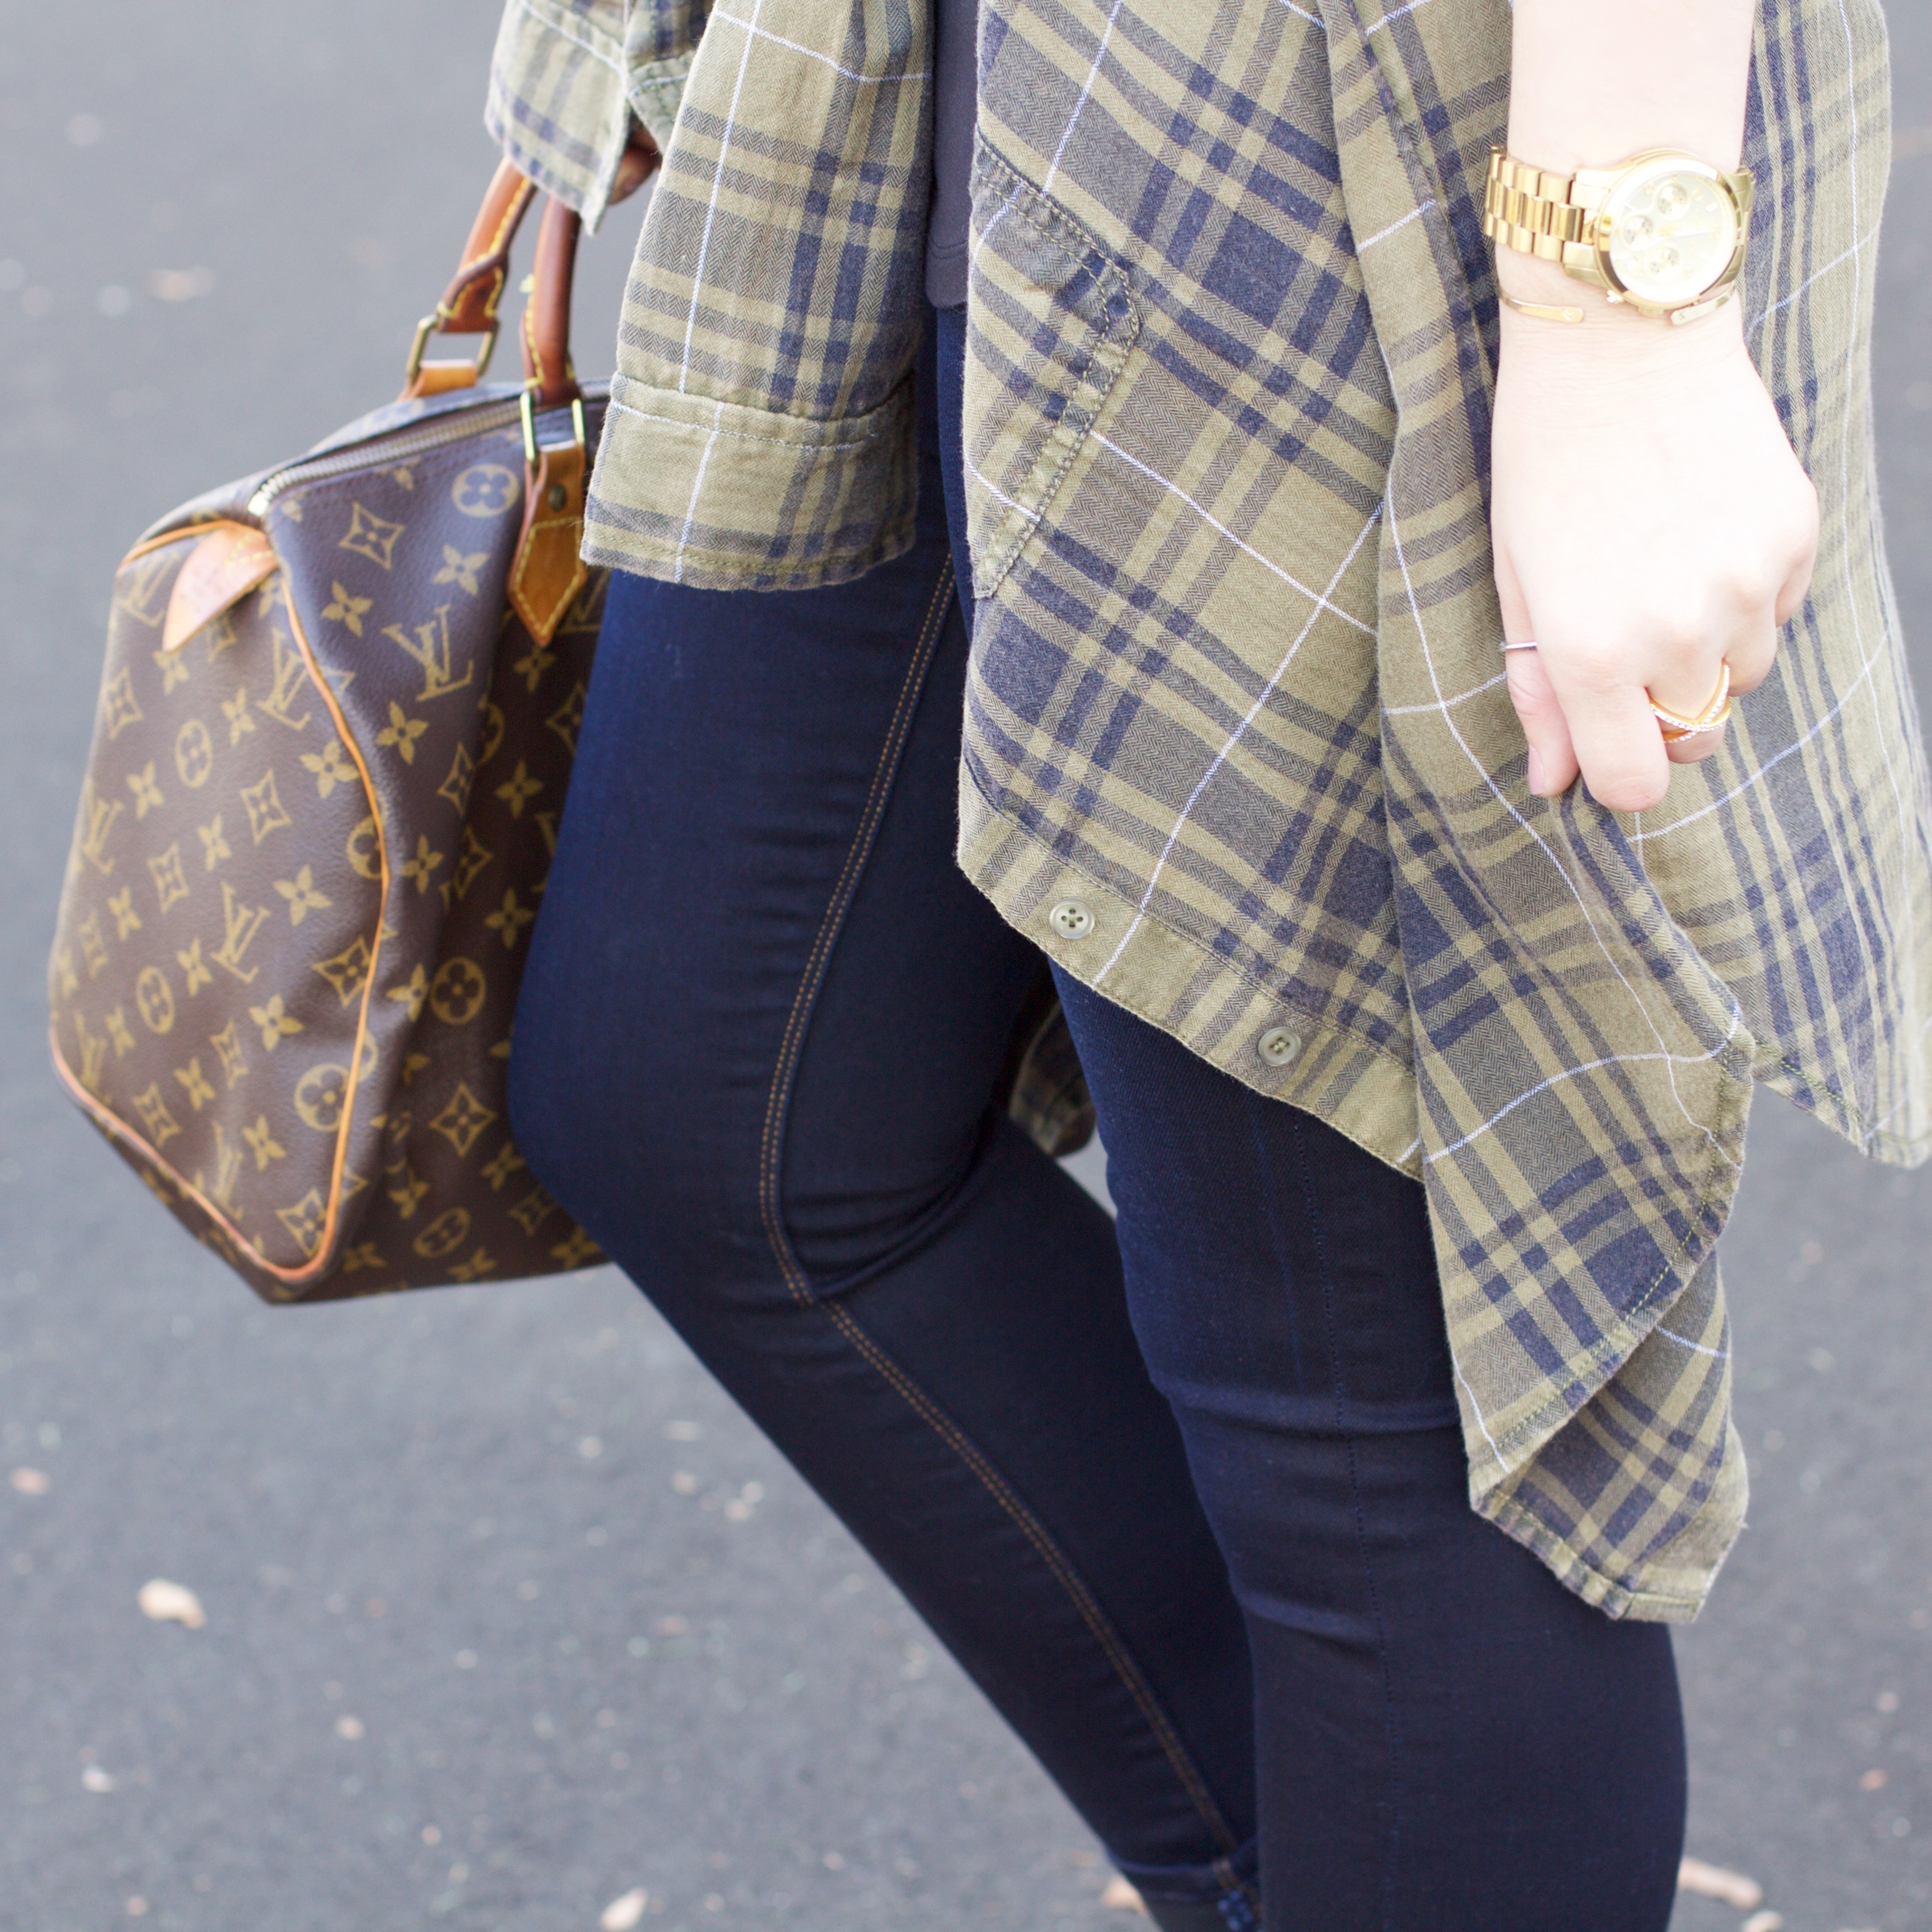 Nordstrom BP flannel - My Styled Life